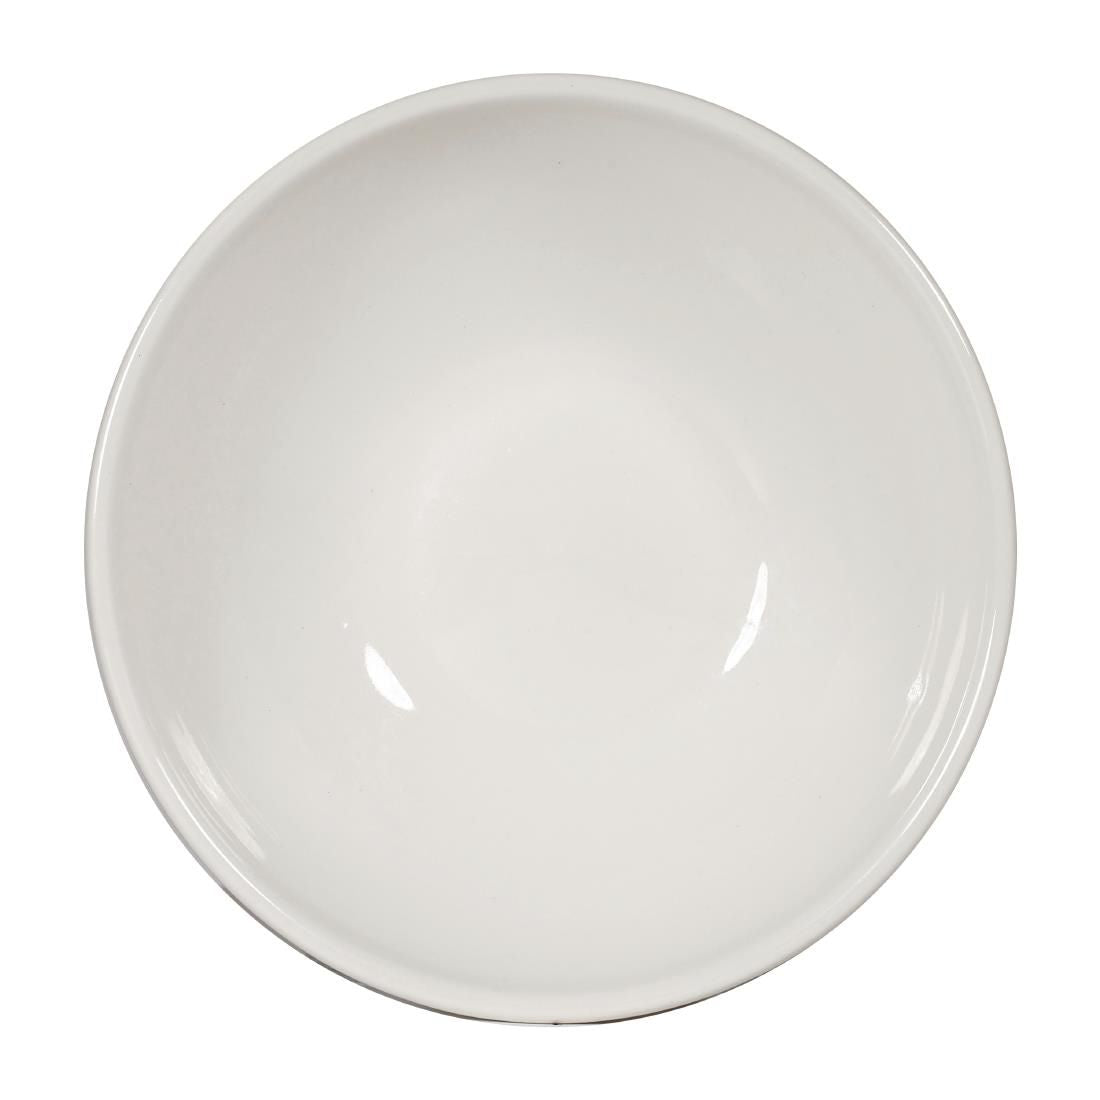 FA692 Churchill Profile Shallow Bowls White 9oz 130mm (Pack of 12) JD Catering Equipment Solutions Ltd